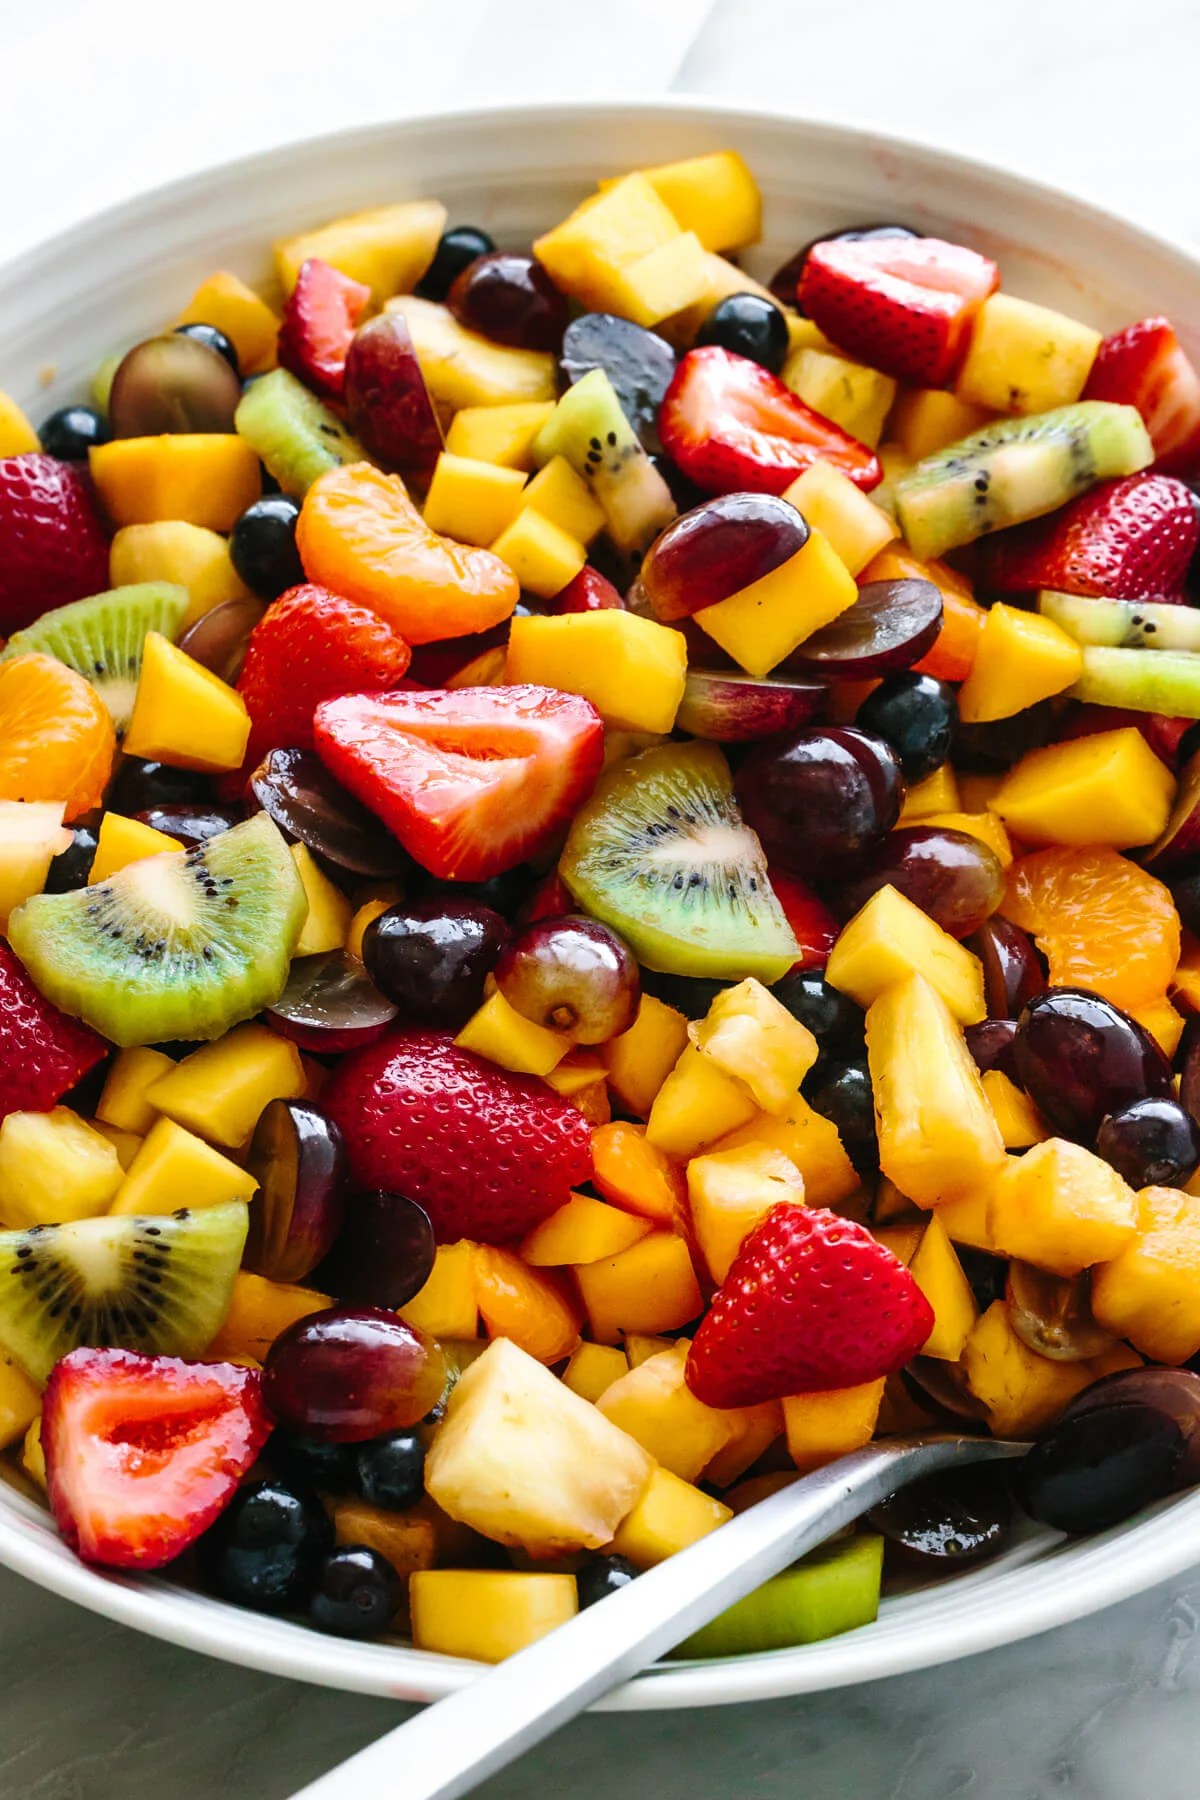 A large bowl of fruit salad with a spoon.